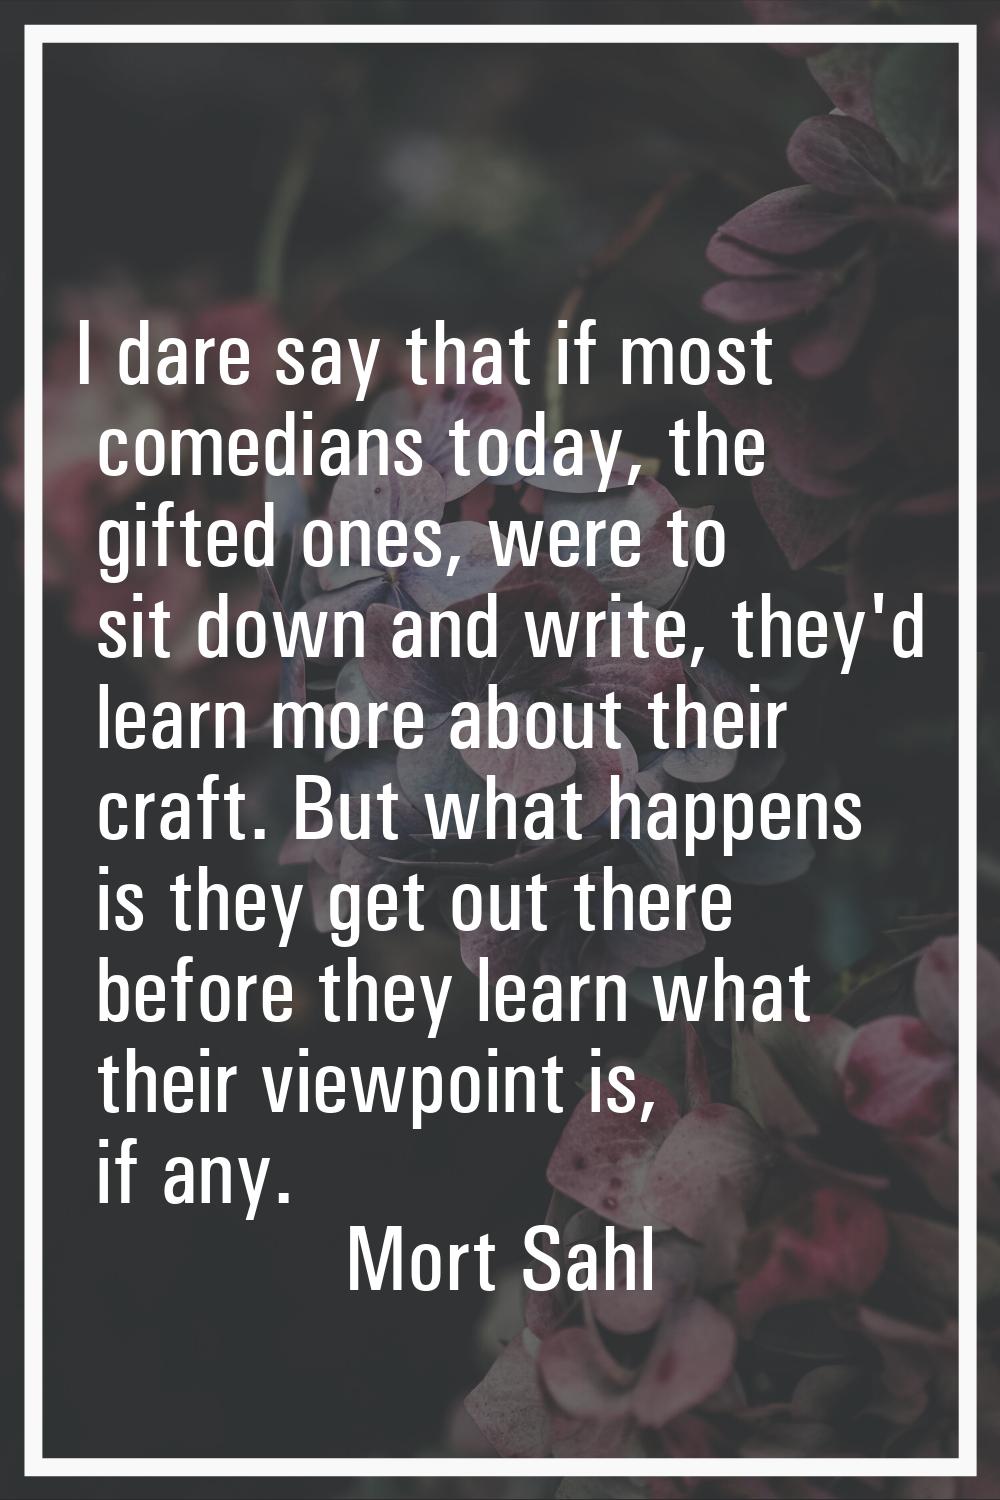 I dare say that if most comedians today, the gifted ones, were to sit down and write, they'd learn 